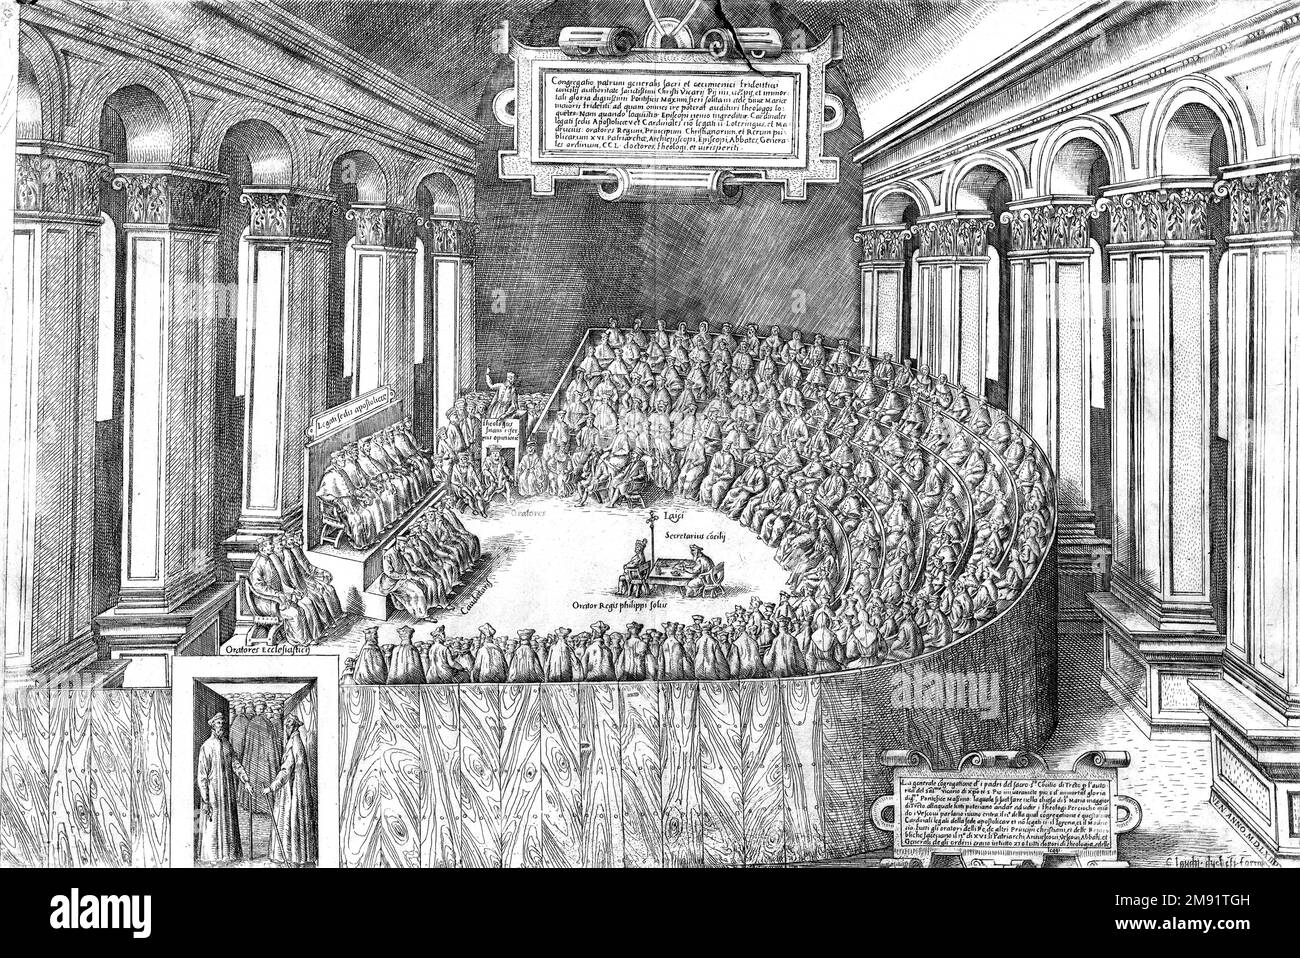 Council of Trent. Illustration of the The Council of Trent (Concilium Tridentinum), held between 1545 and 1563 in Trent (Trento). It was the 19th ecumenical council of the Catholic Church, prompted by the Protestant Reformation, and has been described as the embodiment of the Counter-Reformation. Engraving/etching published by Claudio Duchetti, 1565 Stock Photo